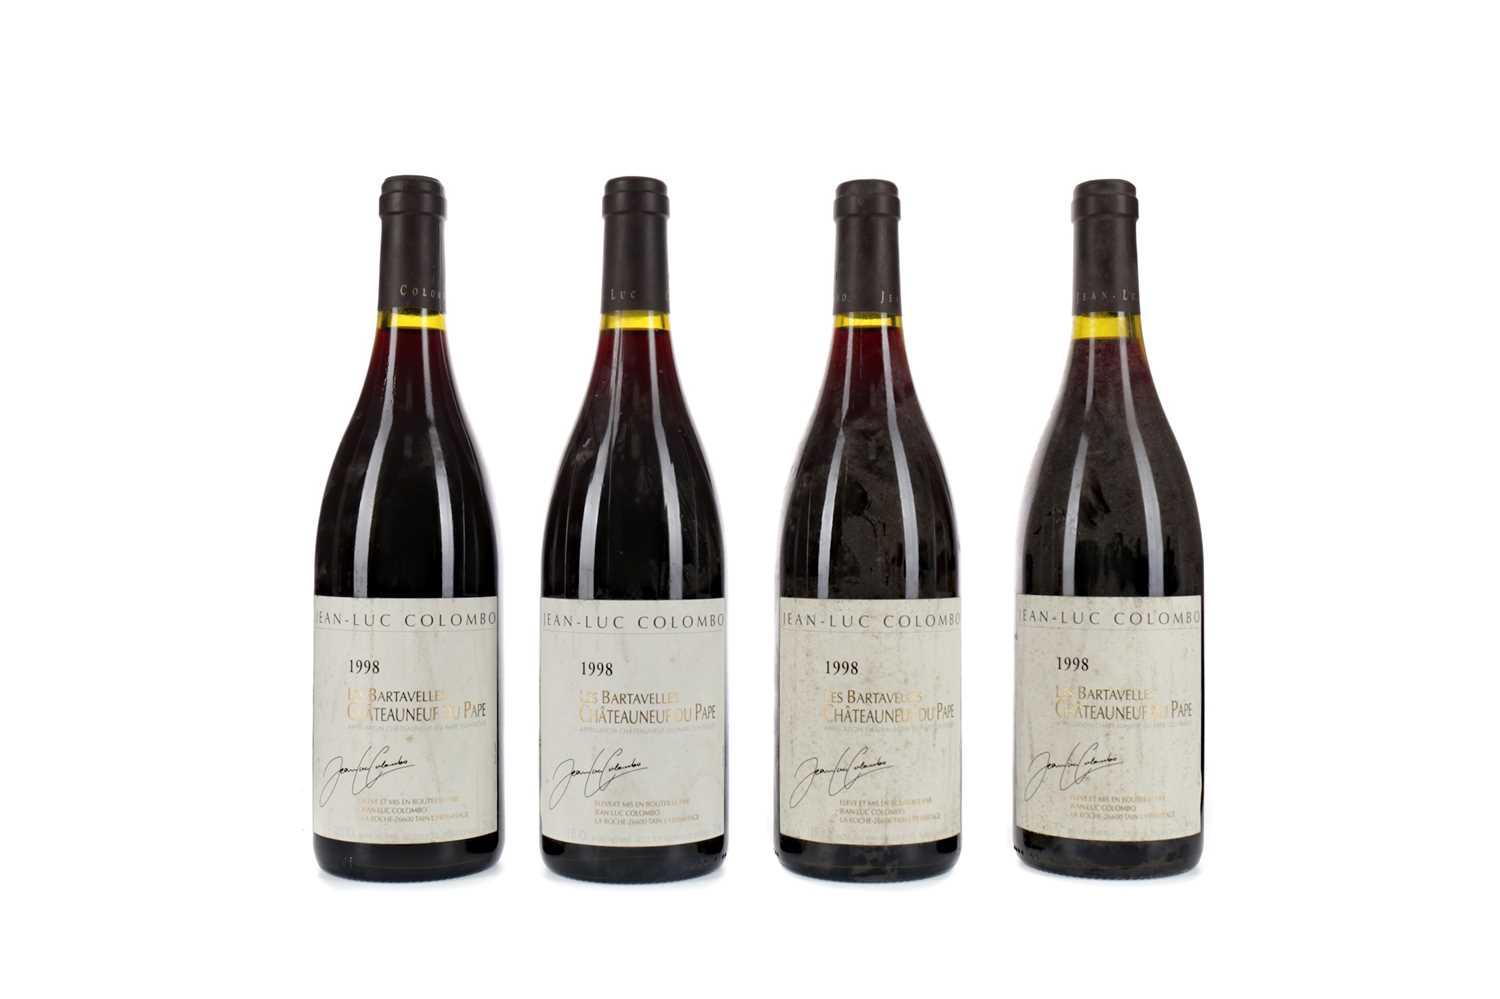 Lot 73 - FOUR BOTTLES OF JEAN-LUC COLOMBO 1998 CHATEAUNEUF DU PAPE